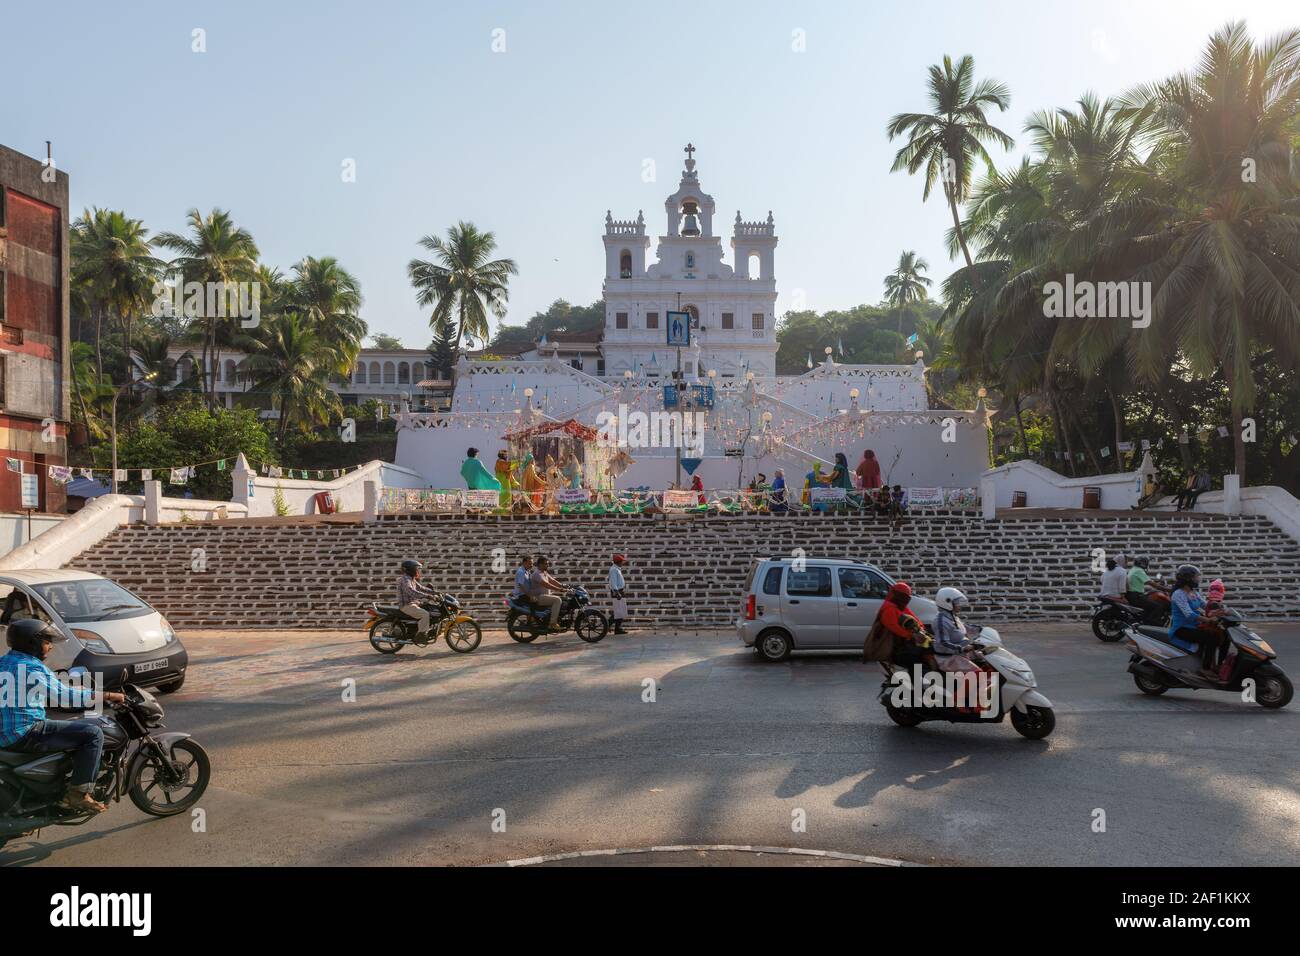 City street in GOA, near catholic church of Our Lady of the Immaculate Conception in Panaji, Goa, India Stock Photo